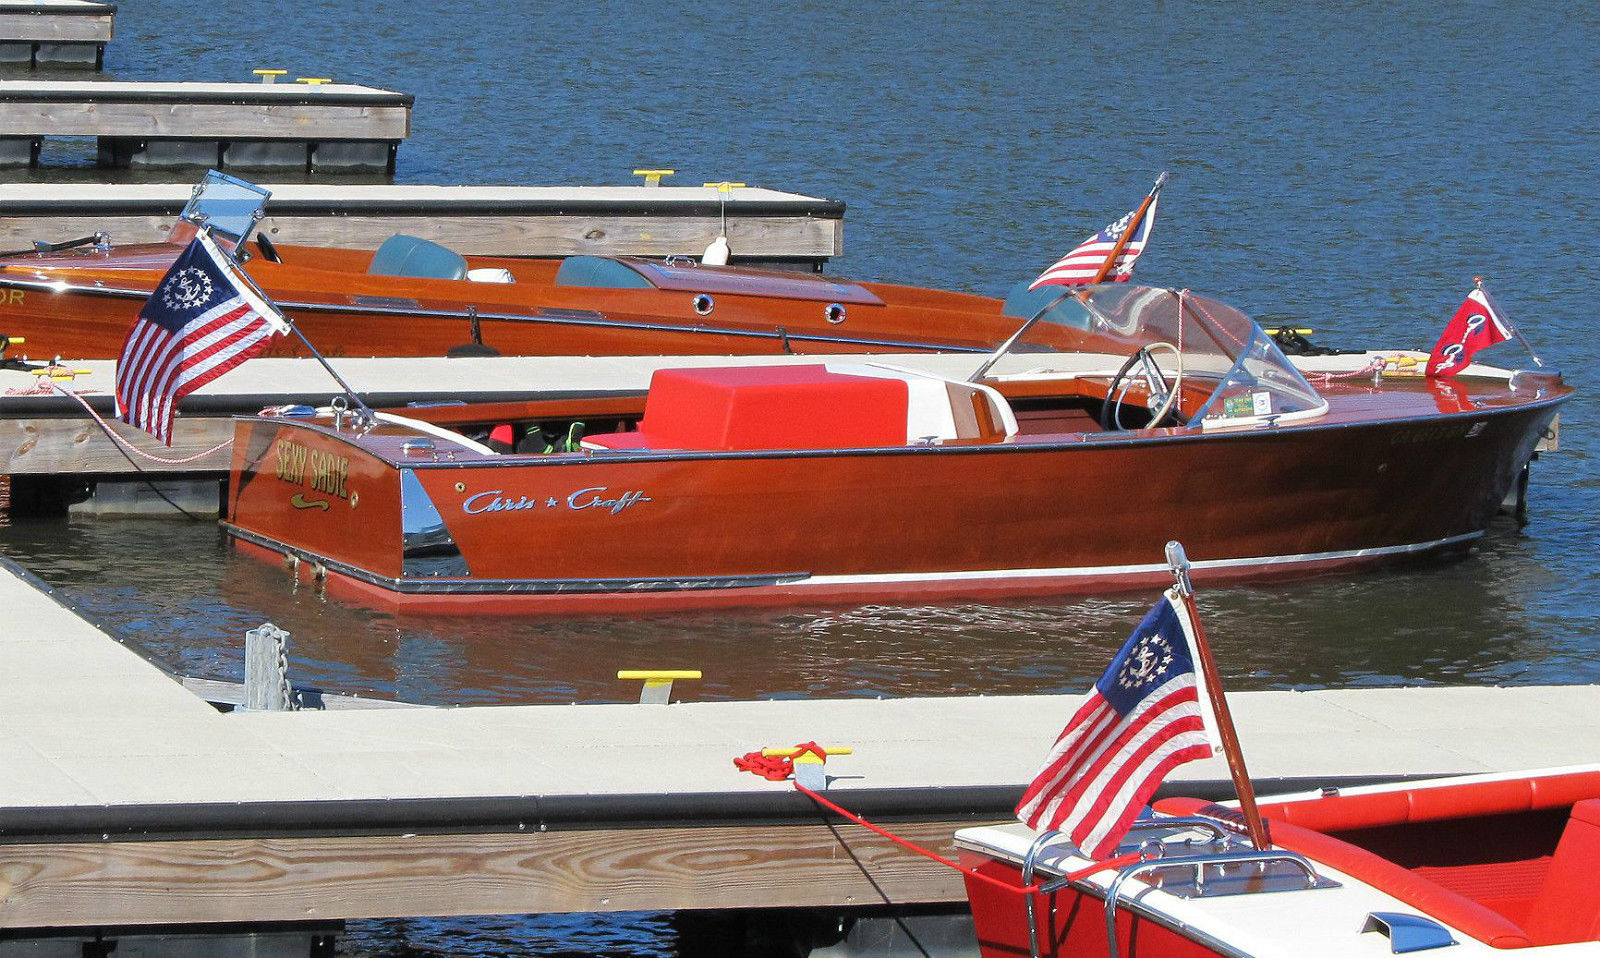 chris craft special runabout / rocket 1947 for sale for